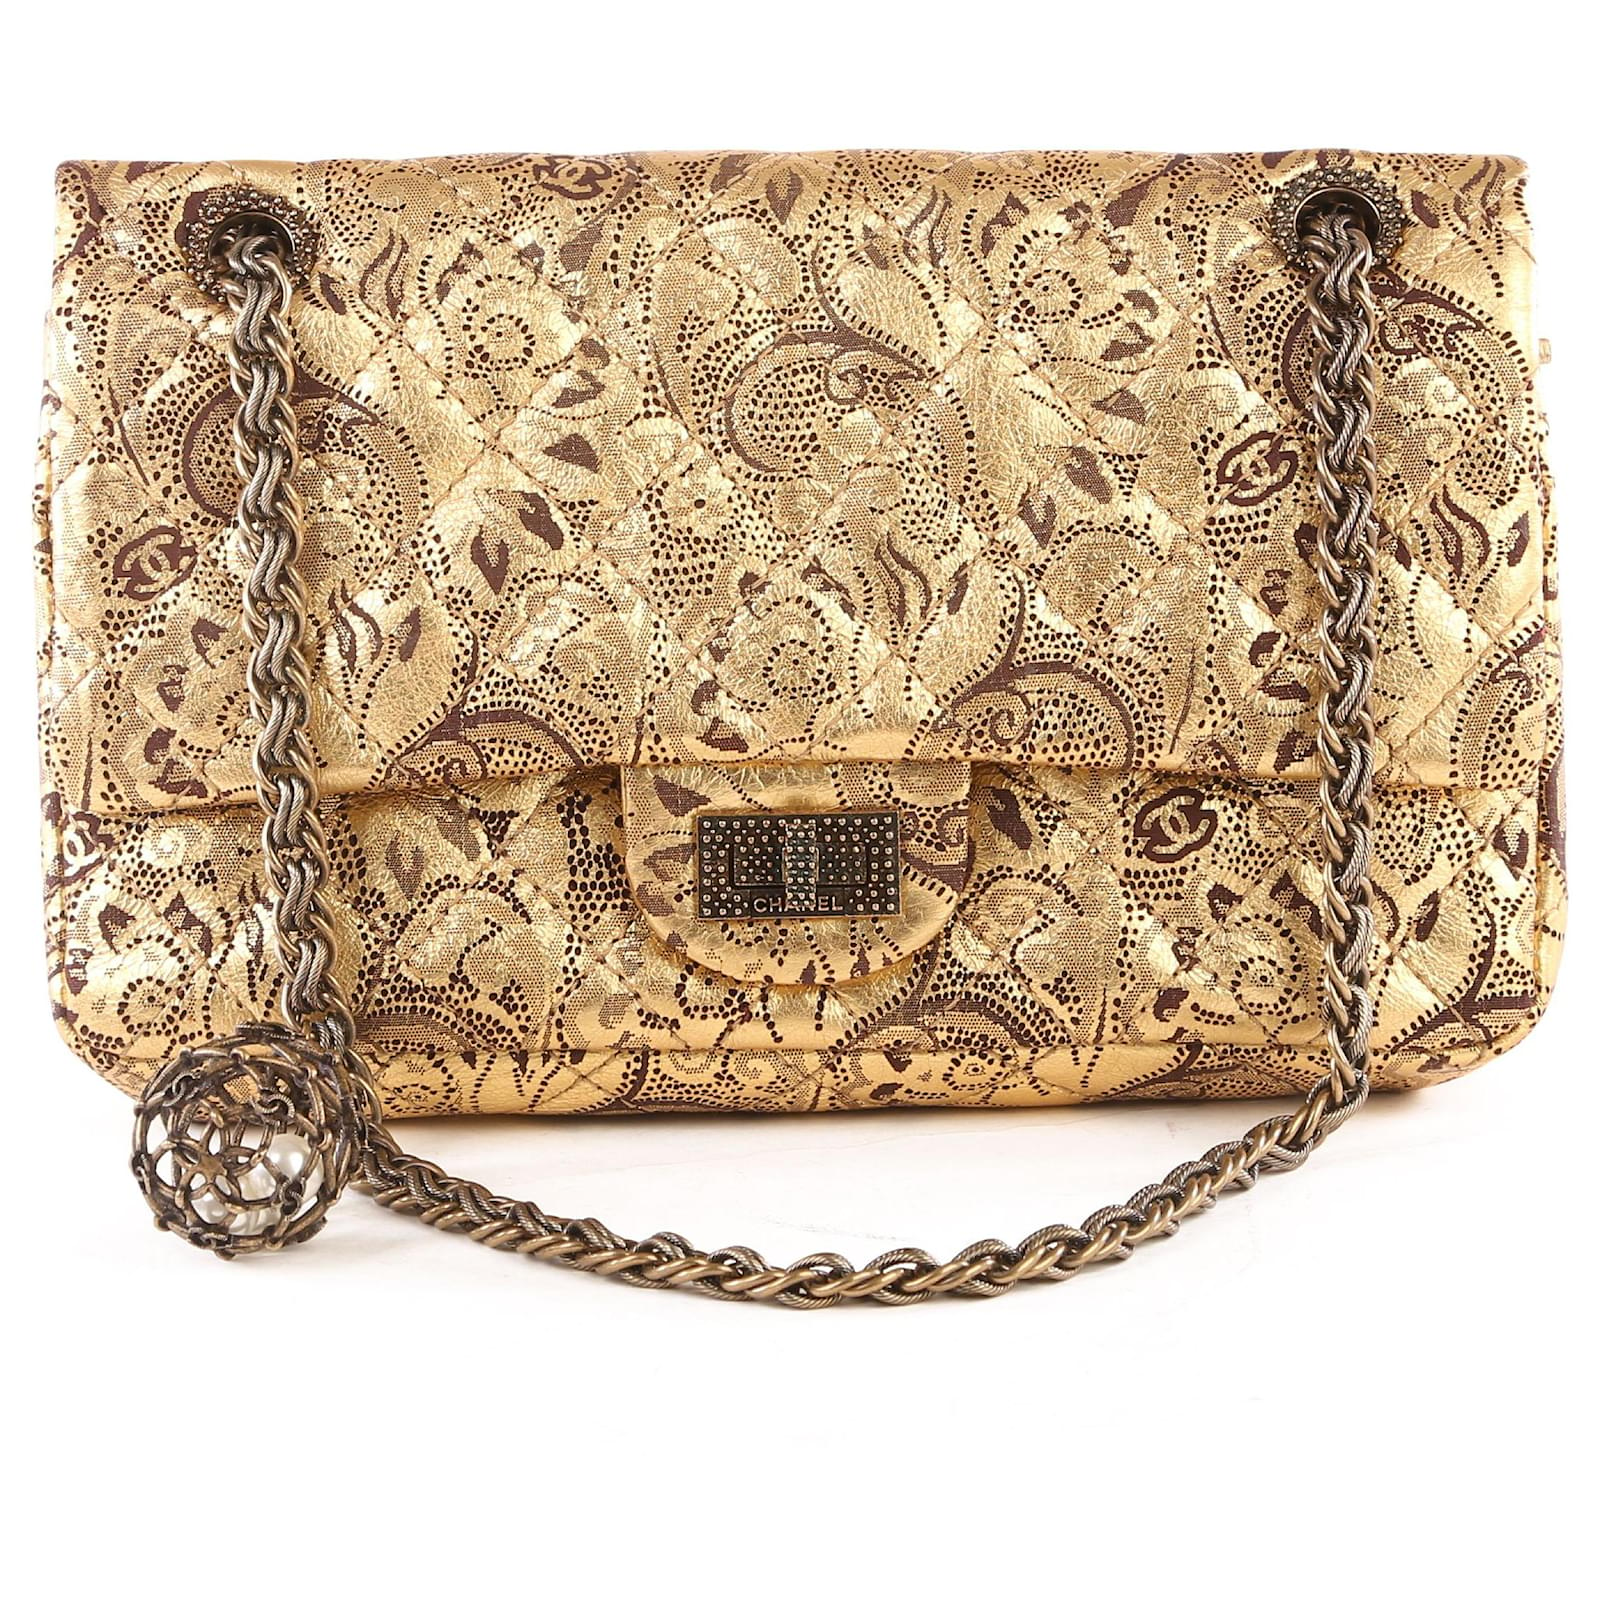 Mademoiselle Chanel Gold Buffalo Leather Paris Moscou Reissue